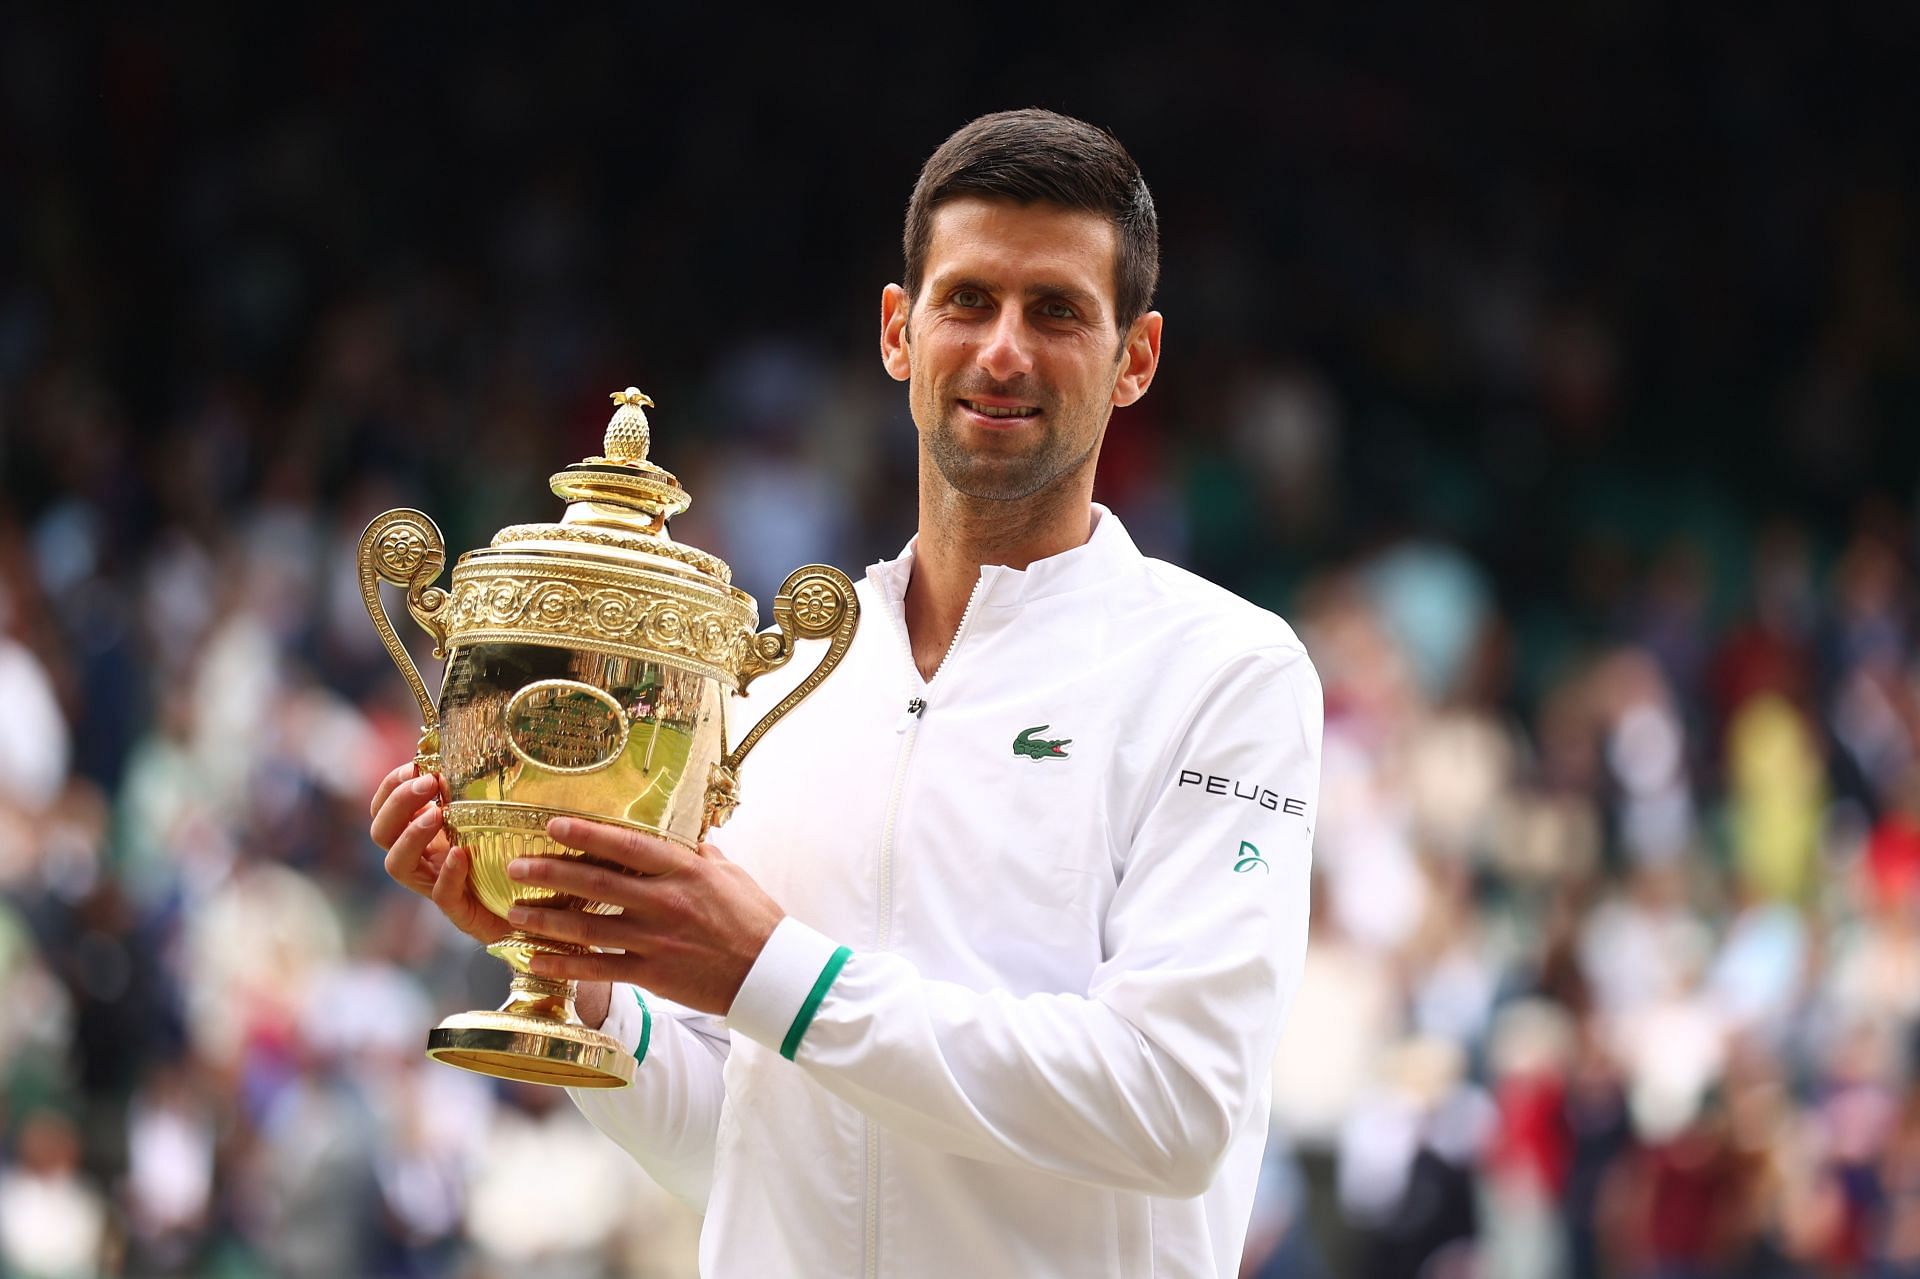 Defending champion Novak Djokovic has sided with the players against Wimbledon